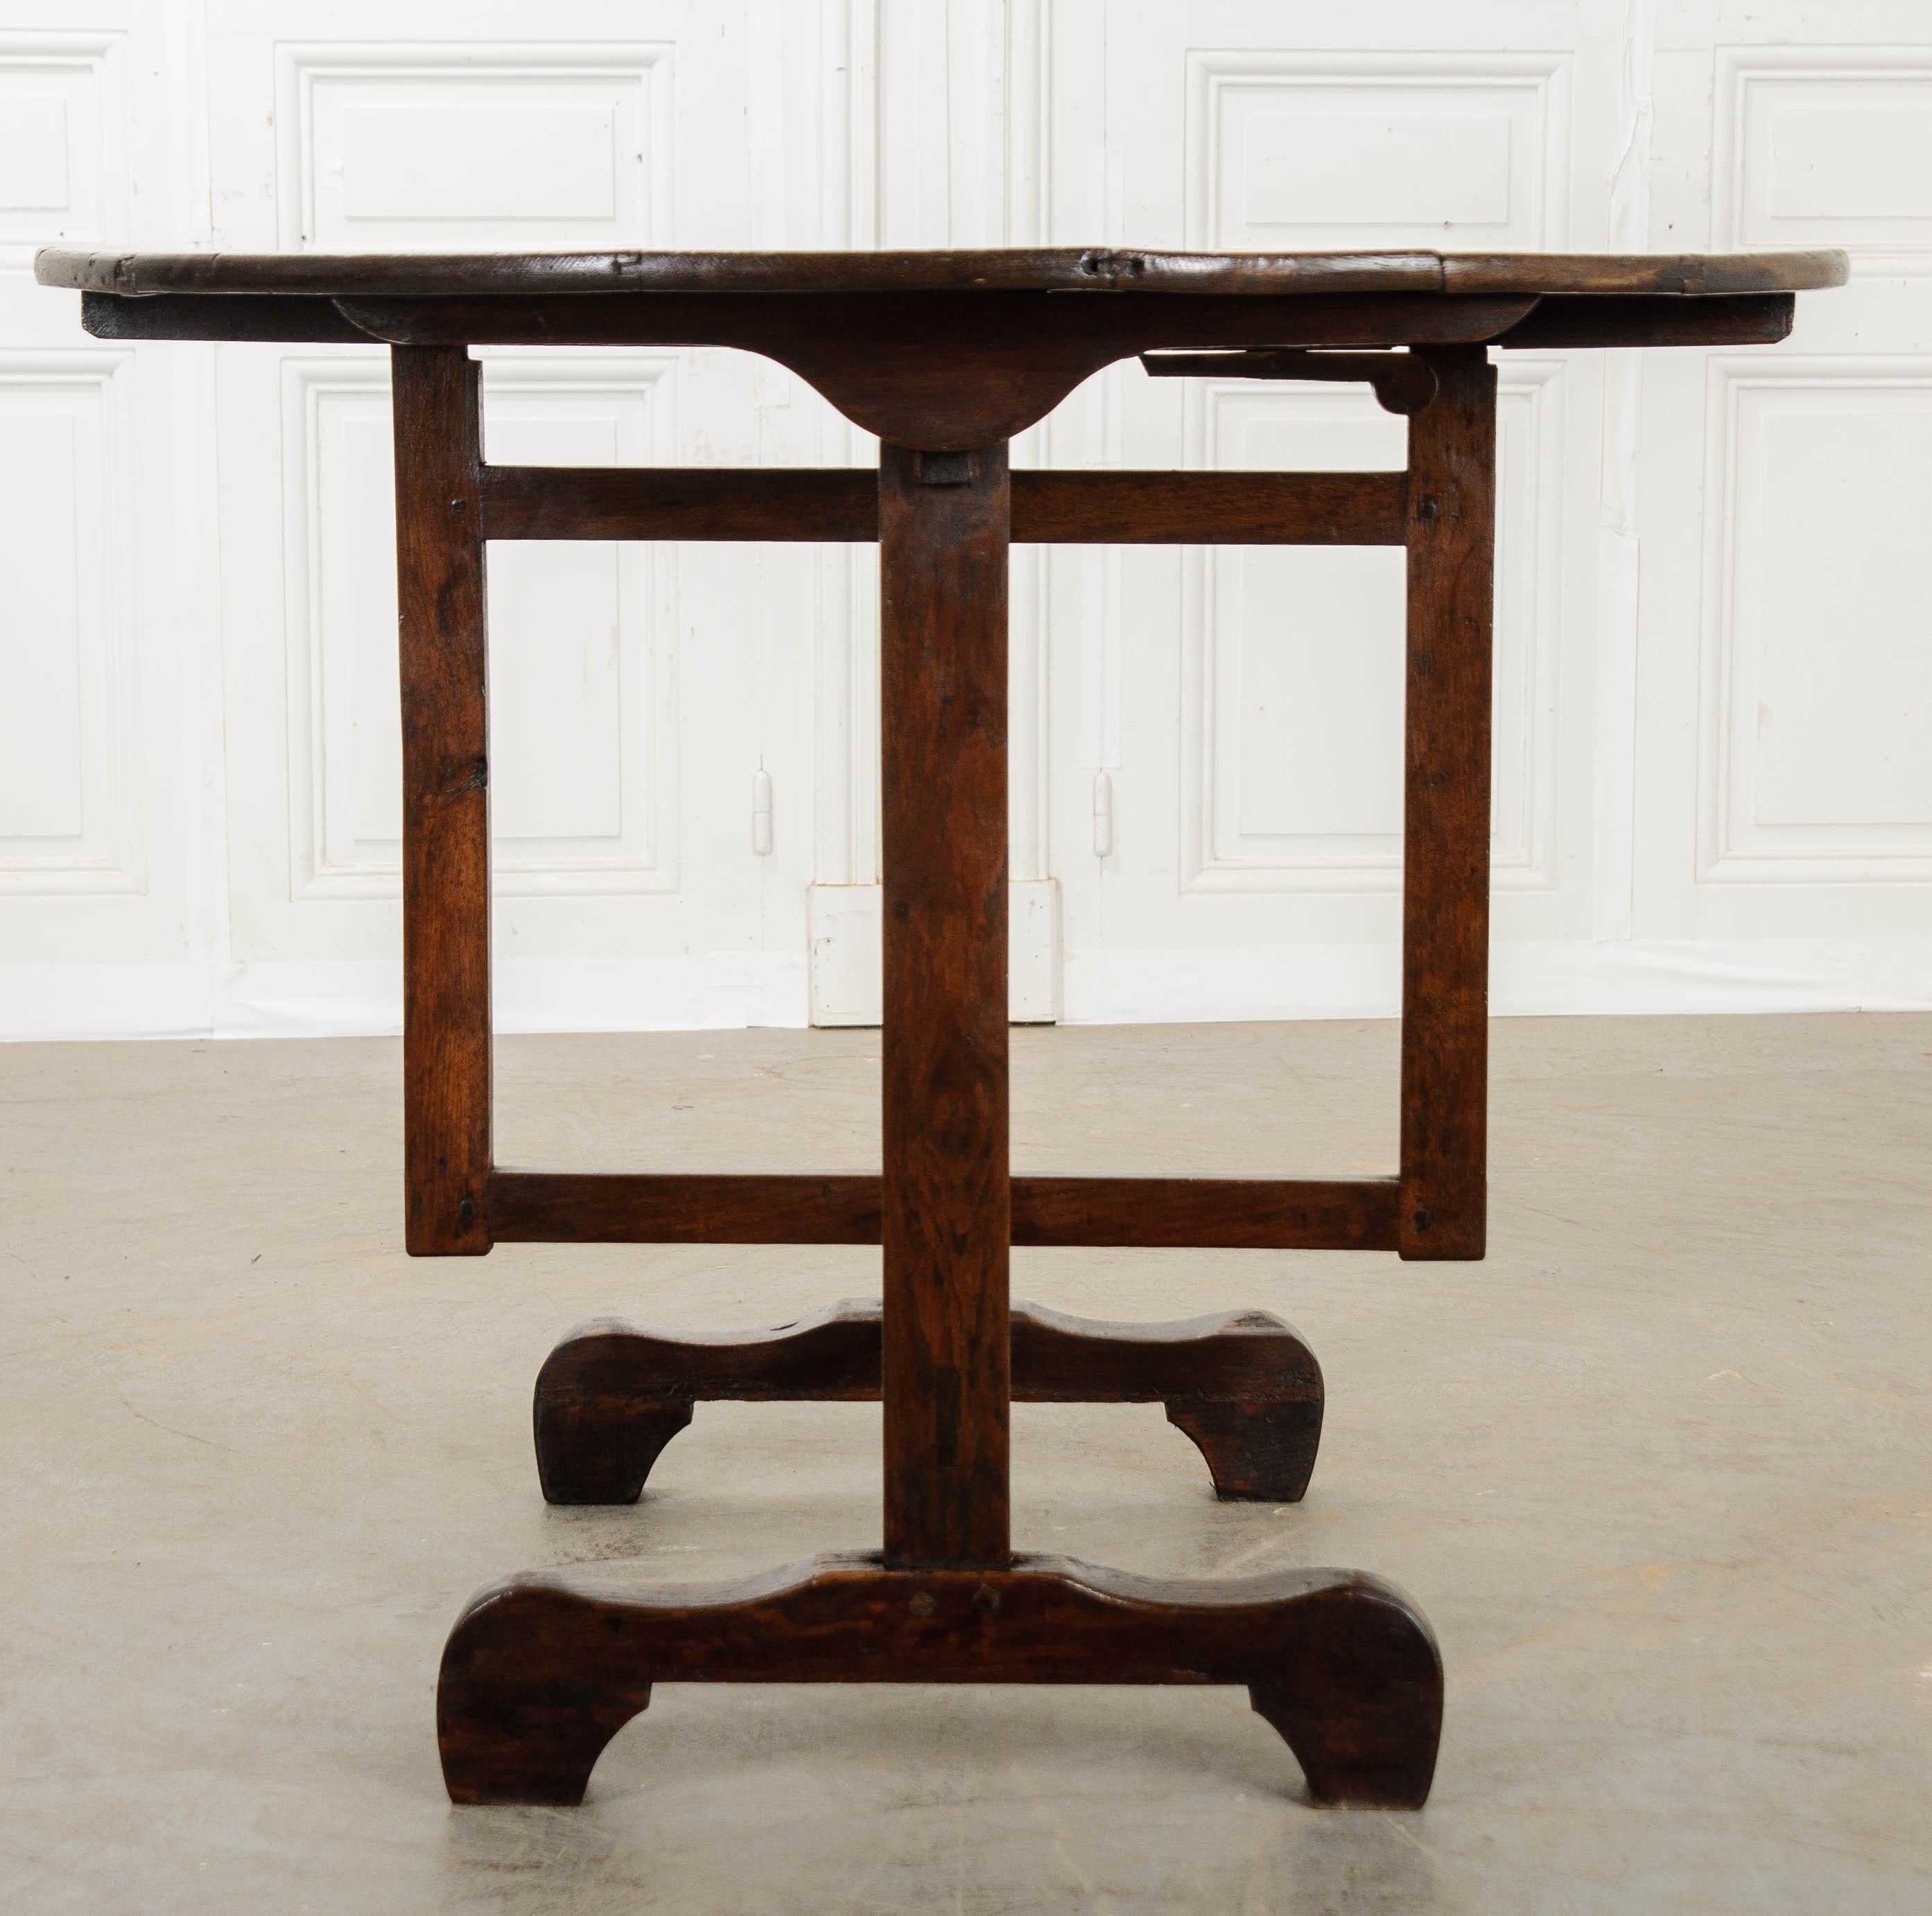 Oftentimes referred to as a “tasting table”, this specialized folding table is utilized at vineyards and wineries across Europe, providing a place to stop and taste their different vintages. This table is made of oak and has a surface height of 28-?